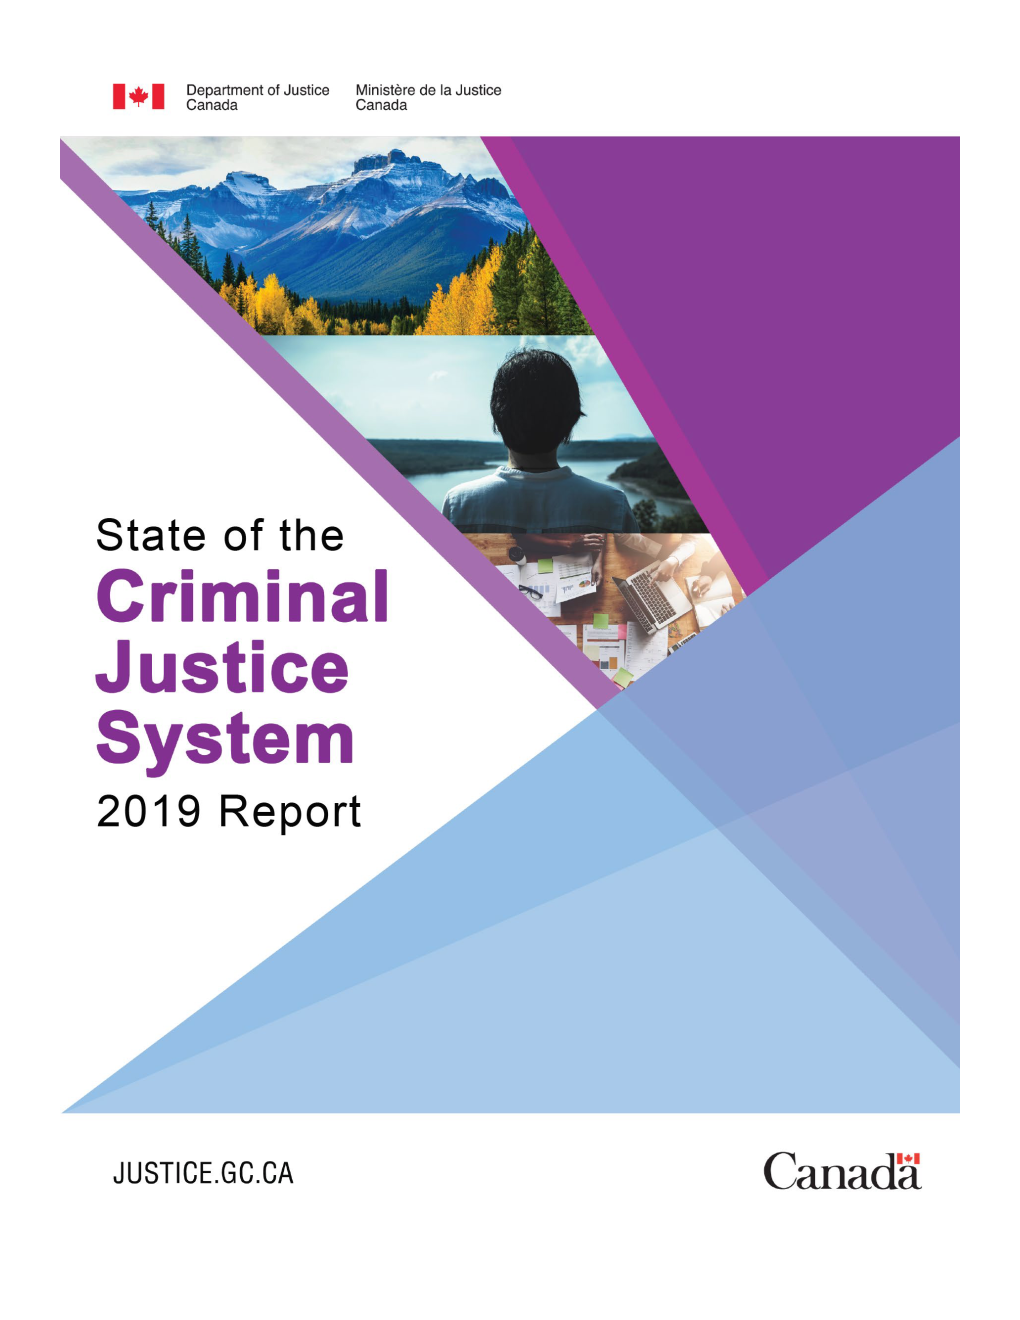 State of the Criminal Justice System Annual Report and an Online Interactive Dashboard [